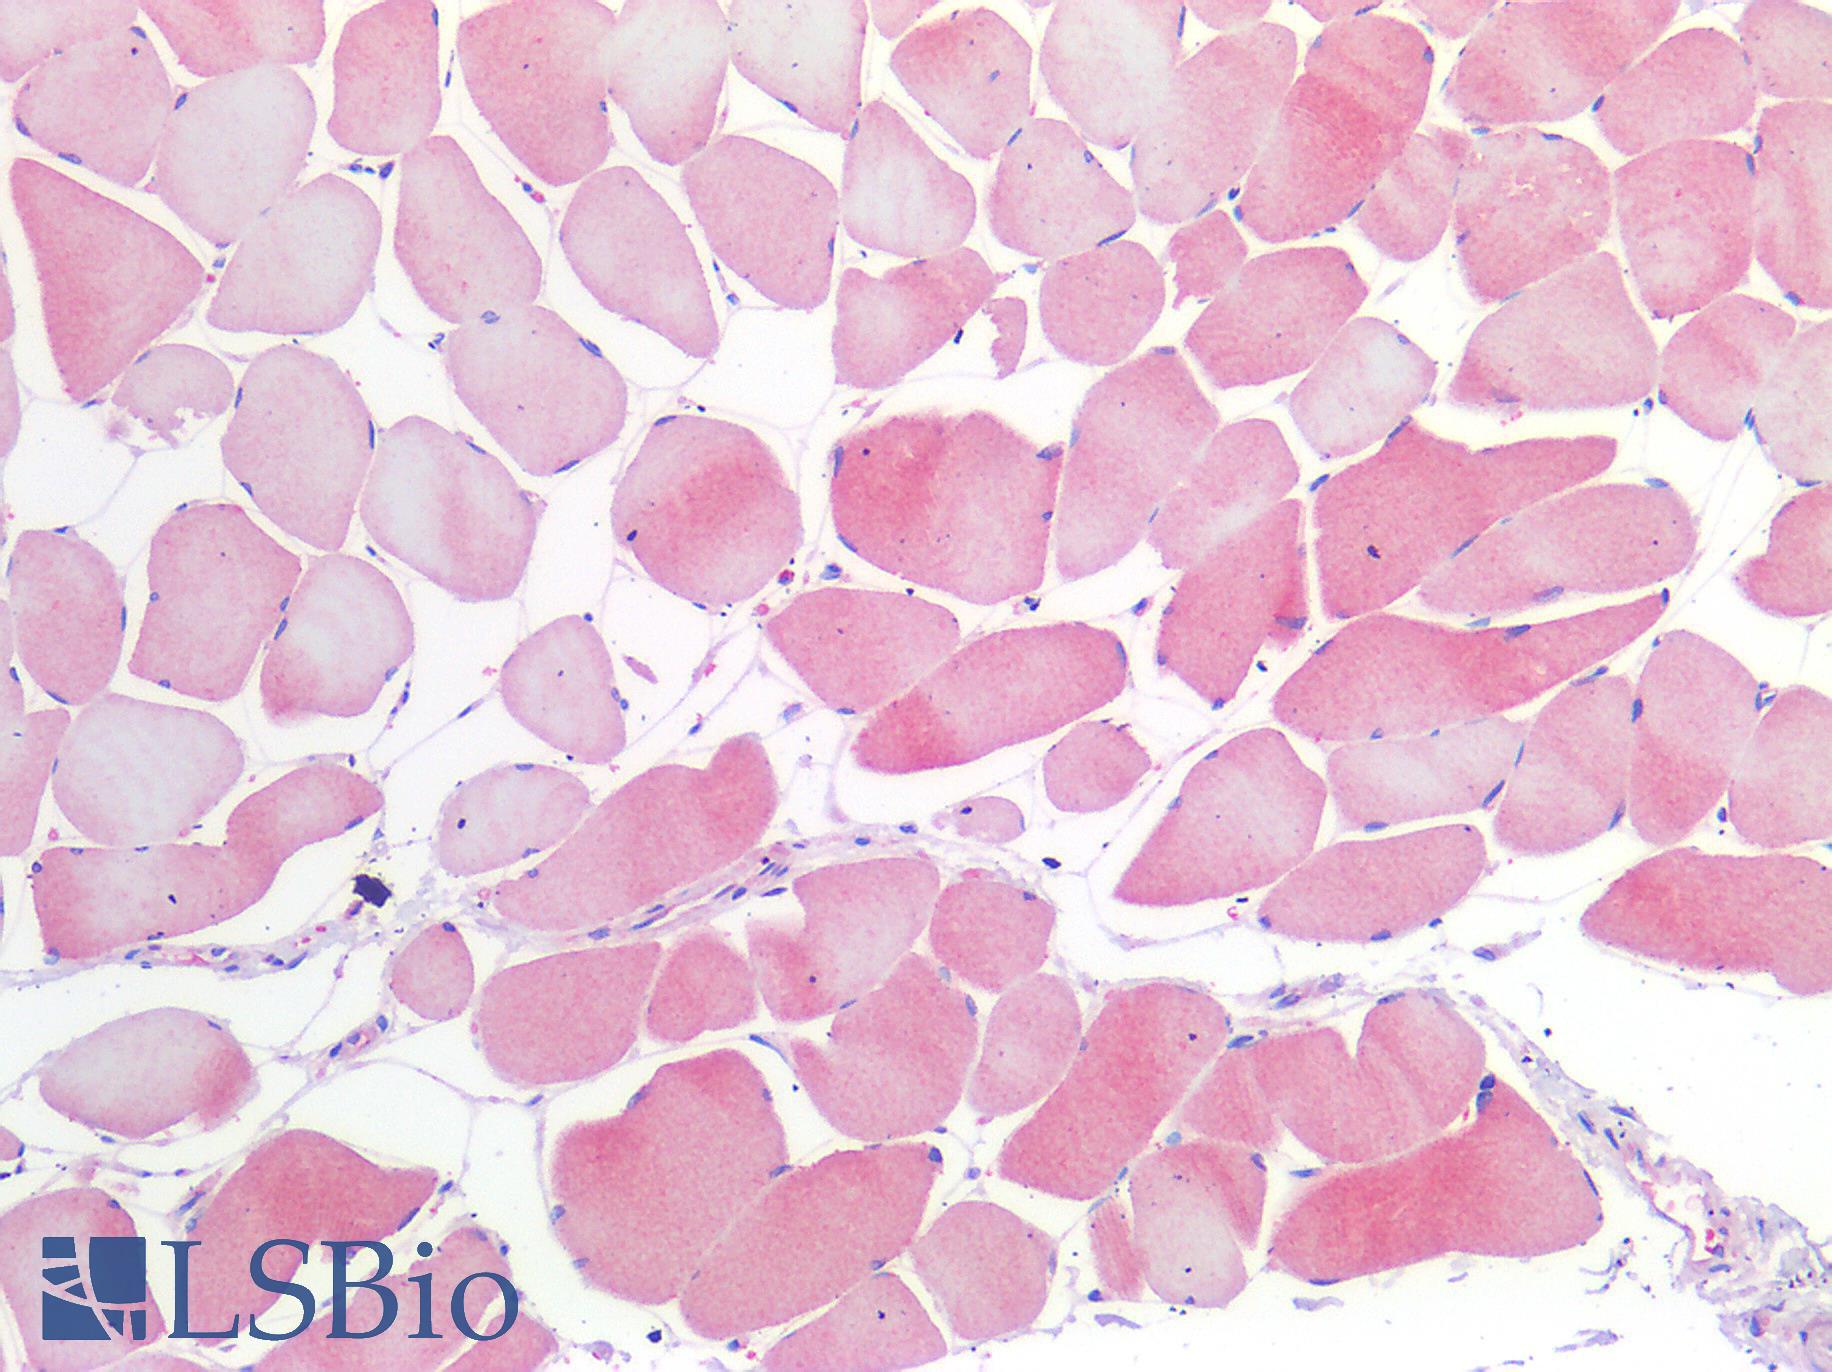 NOS1 / nNOS Antibody - Human Skeletal Muscle: Formalin-Fixed, Paraffin-Embedded (FFPE)